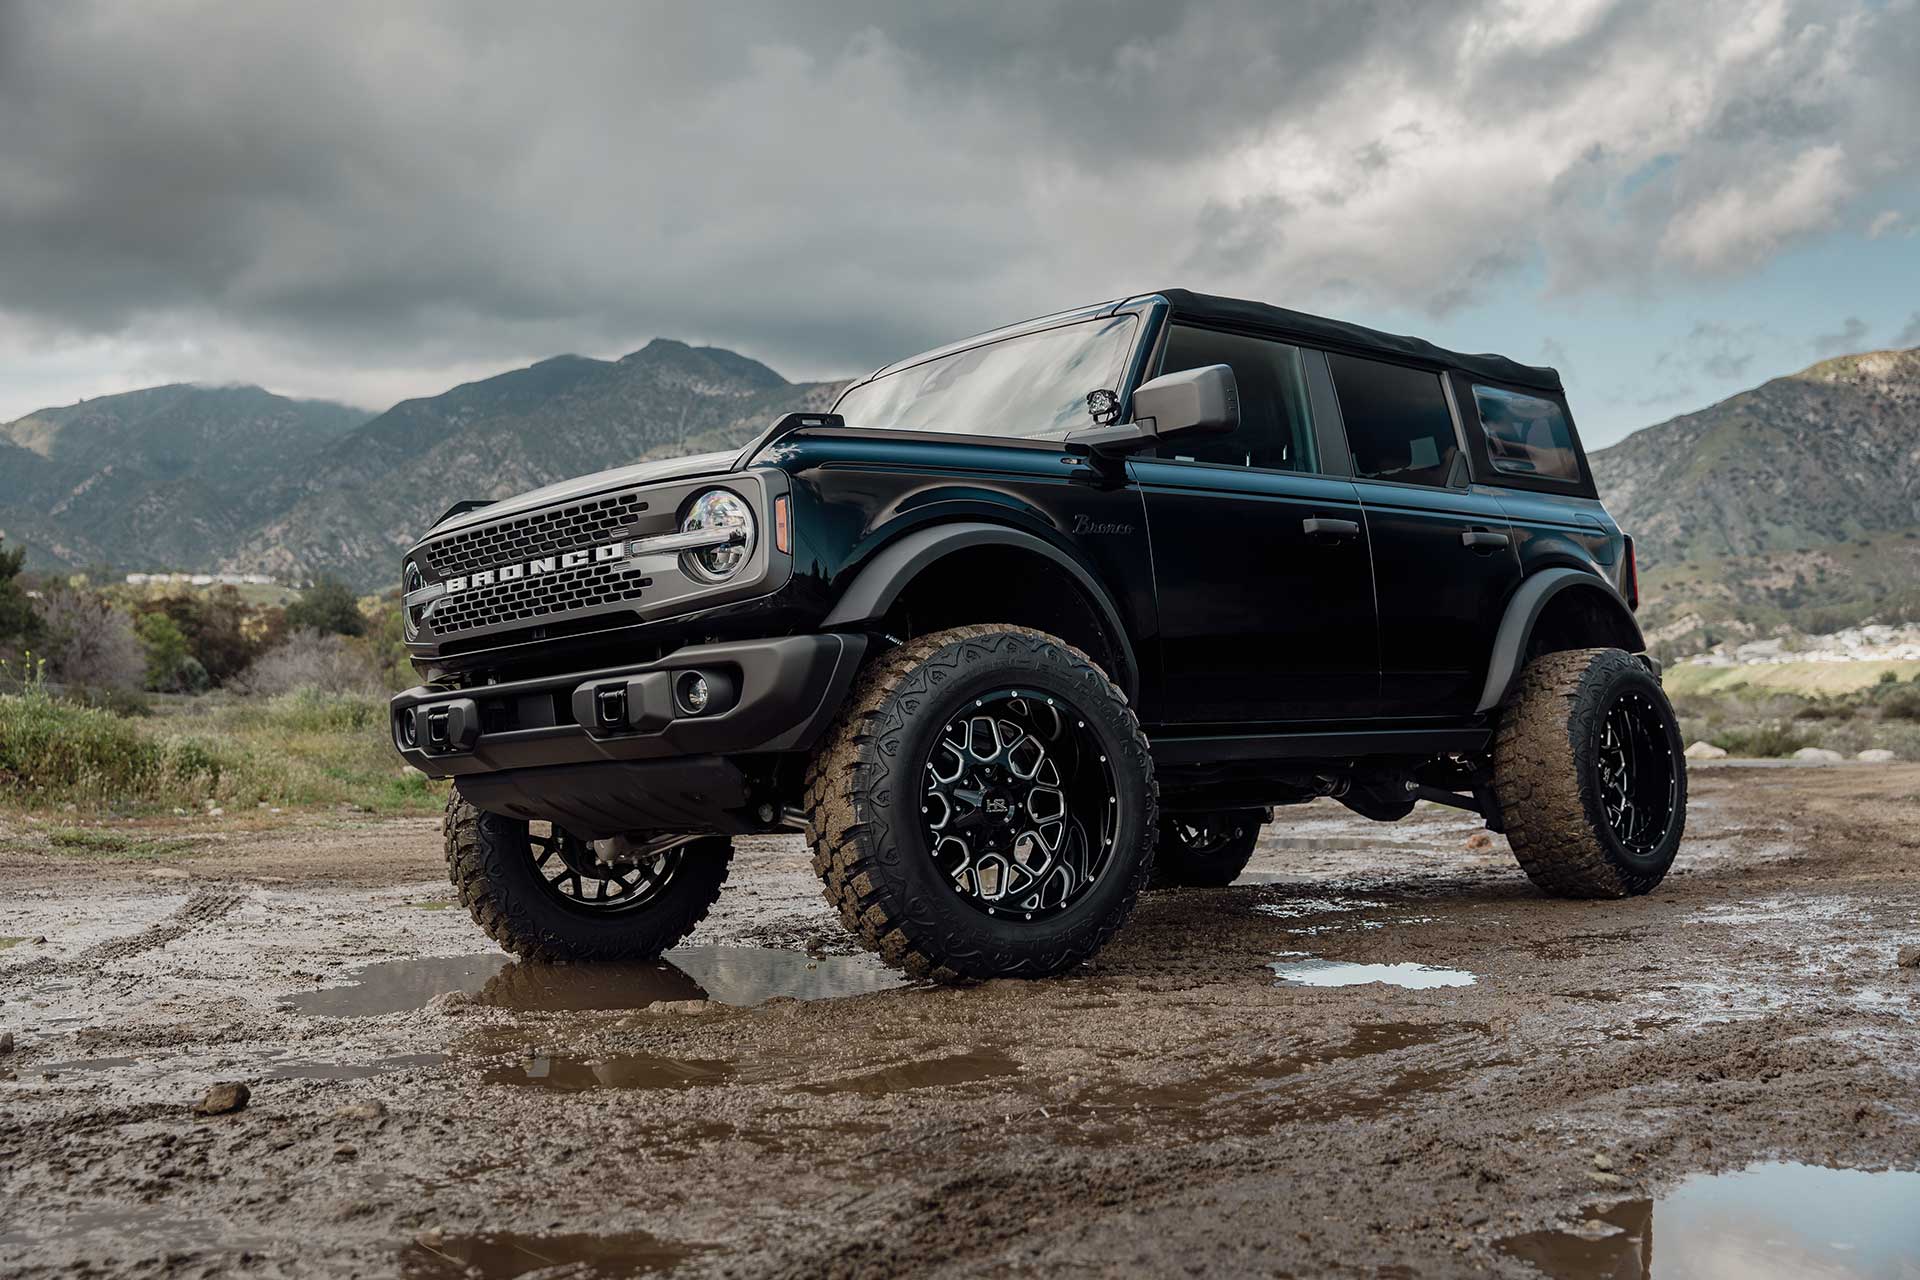 A sixth generation Ford Bronco with Repulsor M/T RX tires in the mud